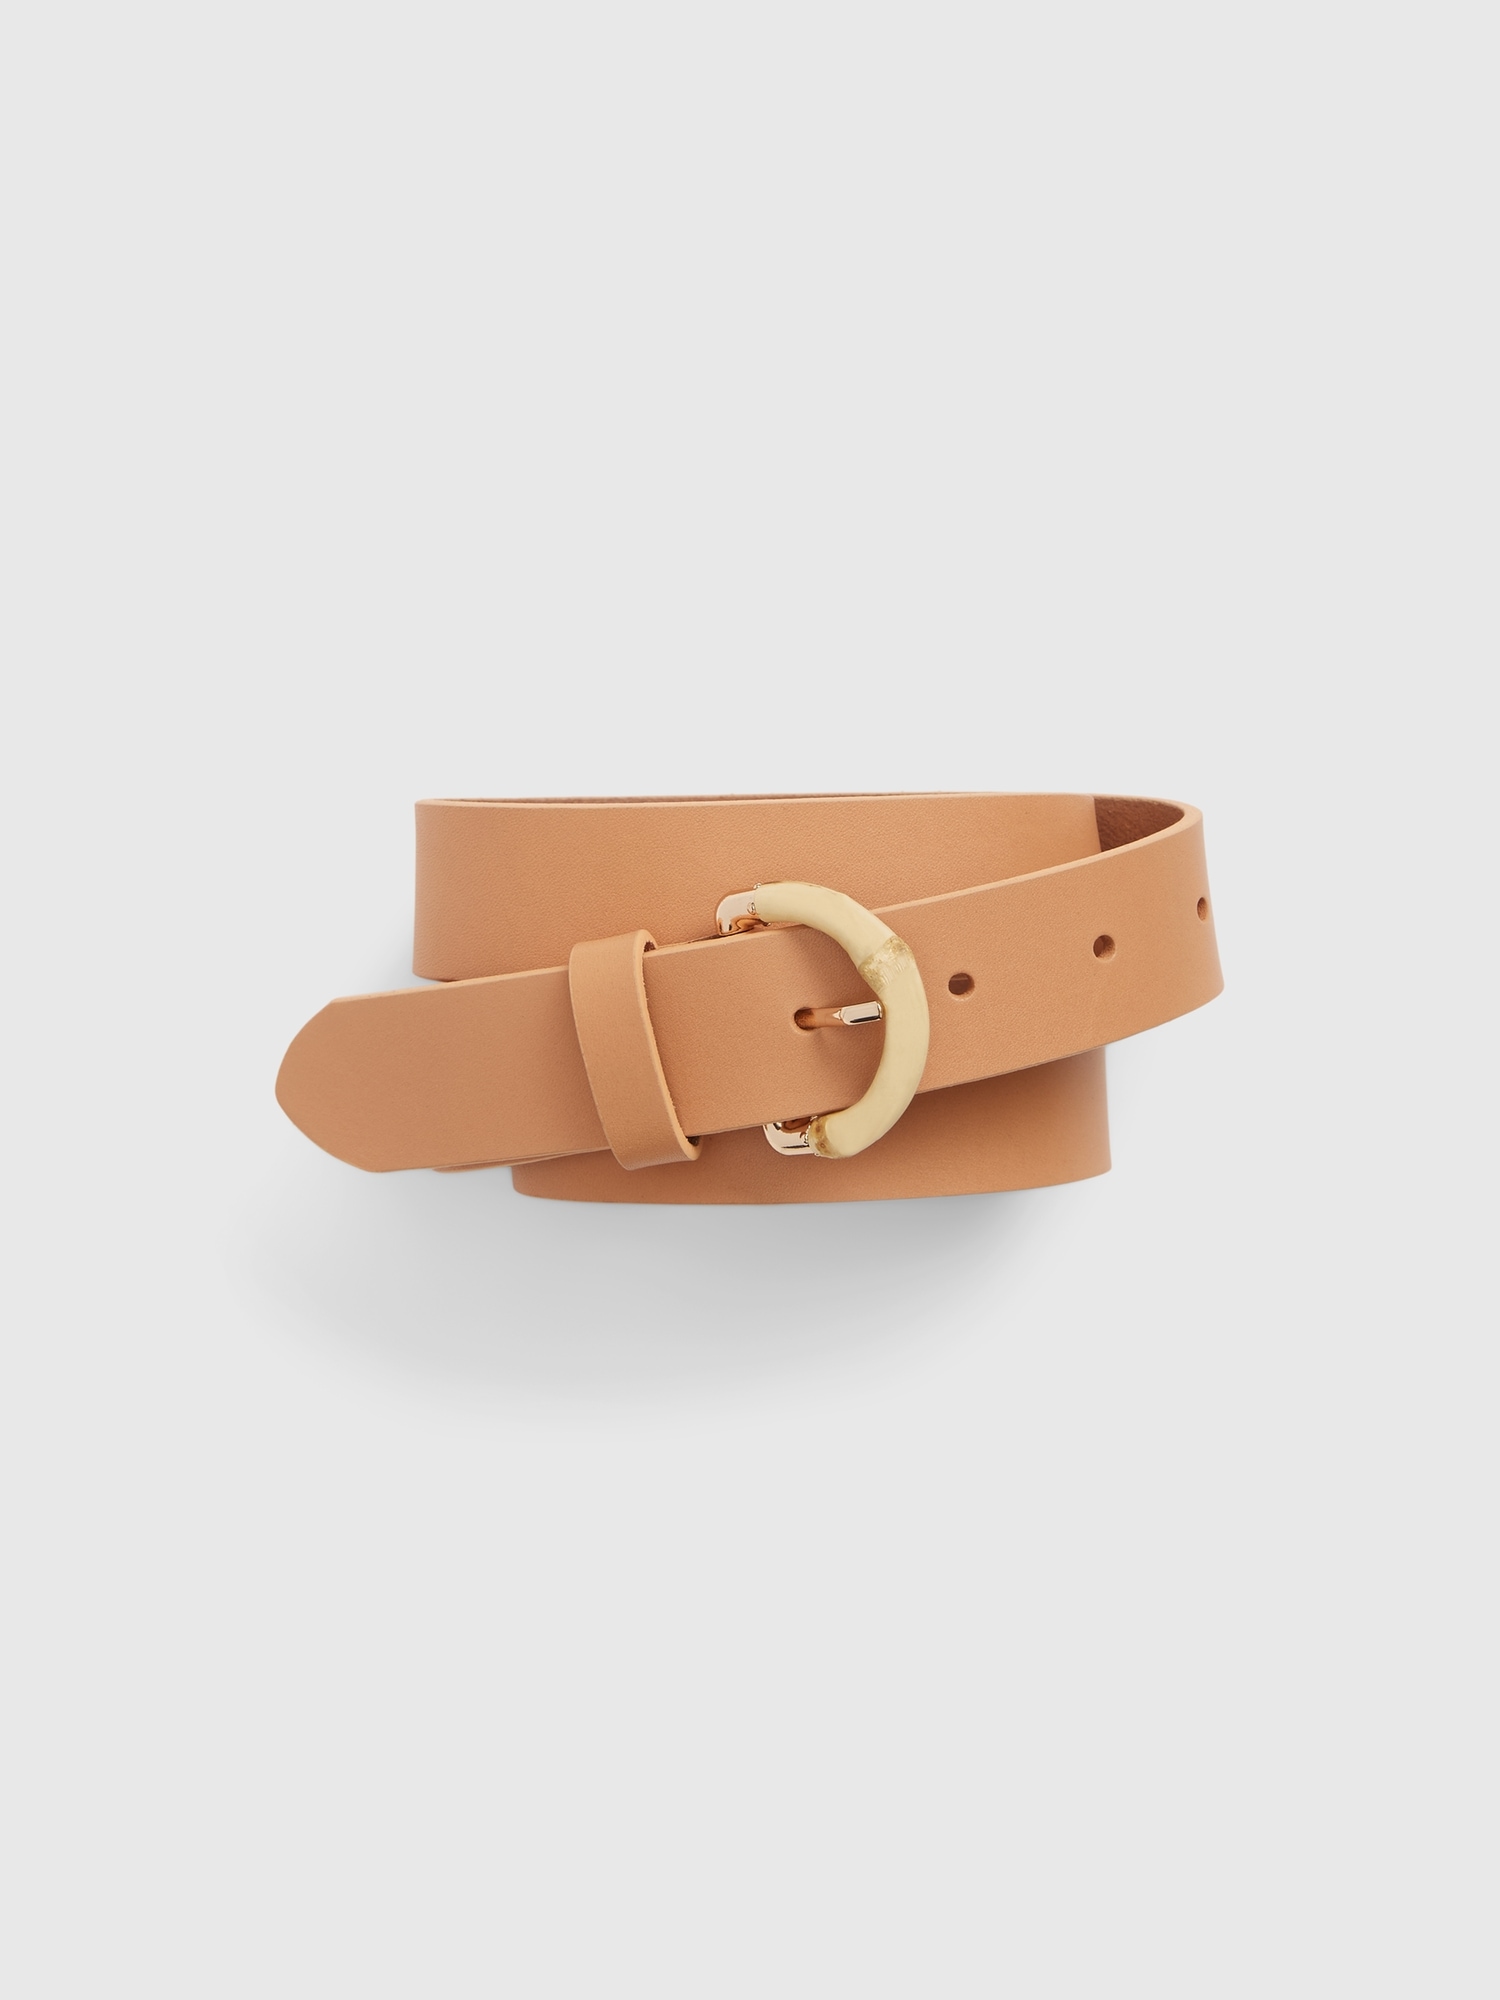 Gap Leather Belt with Bamboo Buckle brown. 1